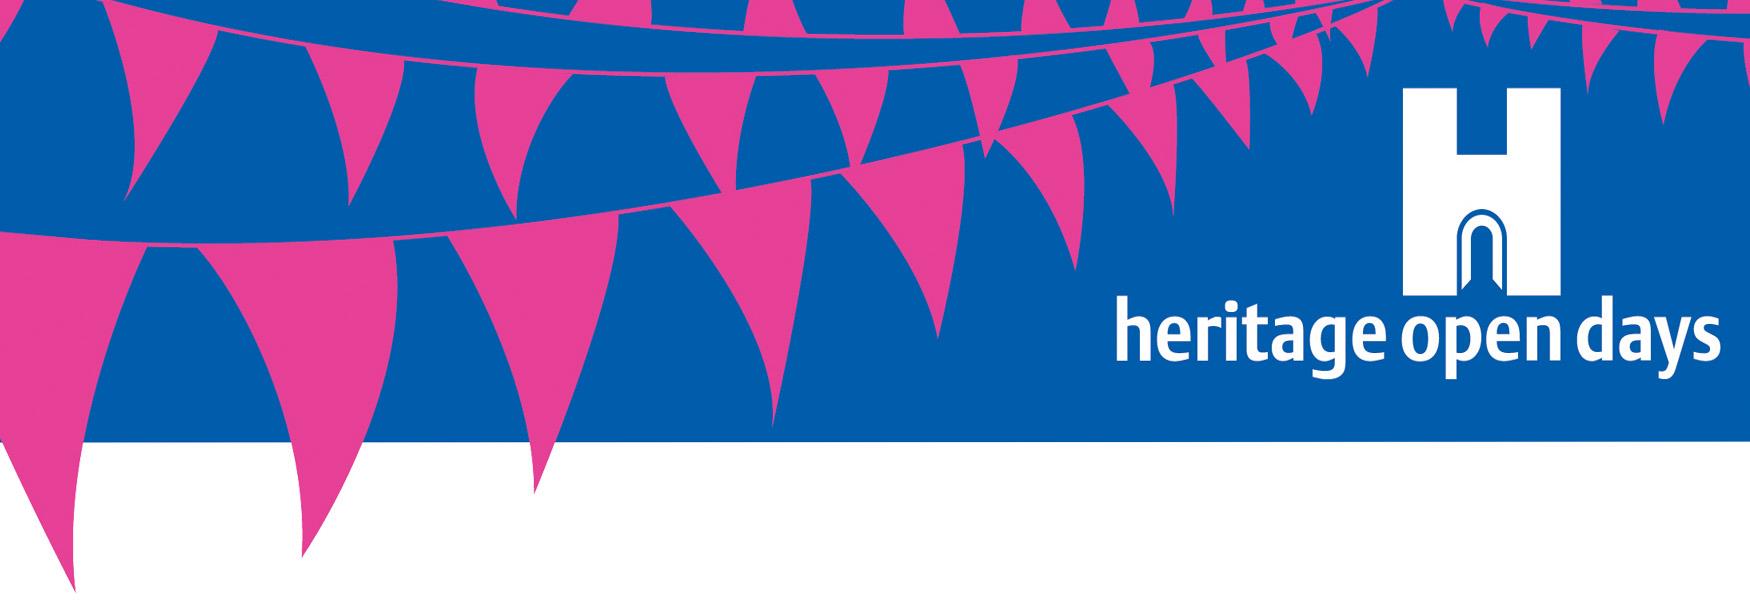 Heritage Open Days Bunting